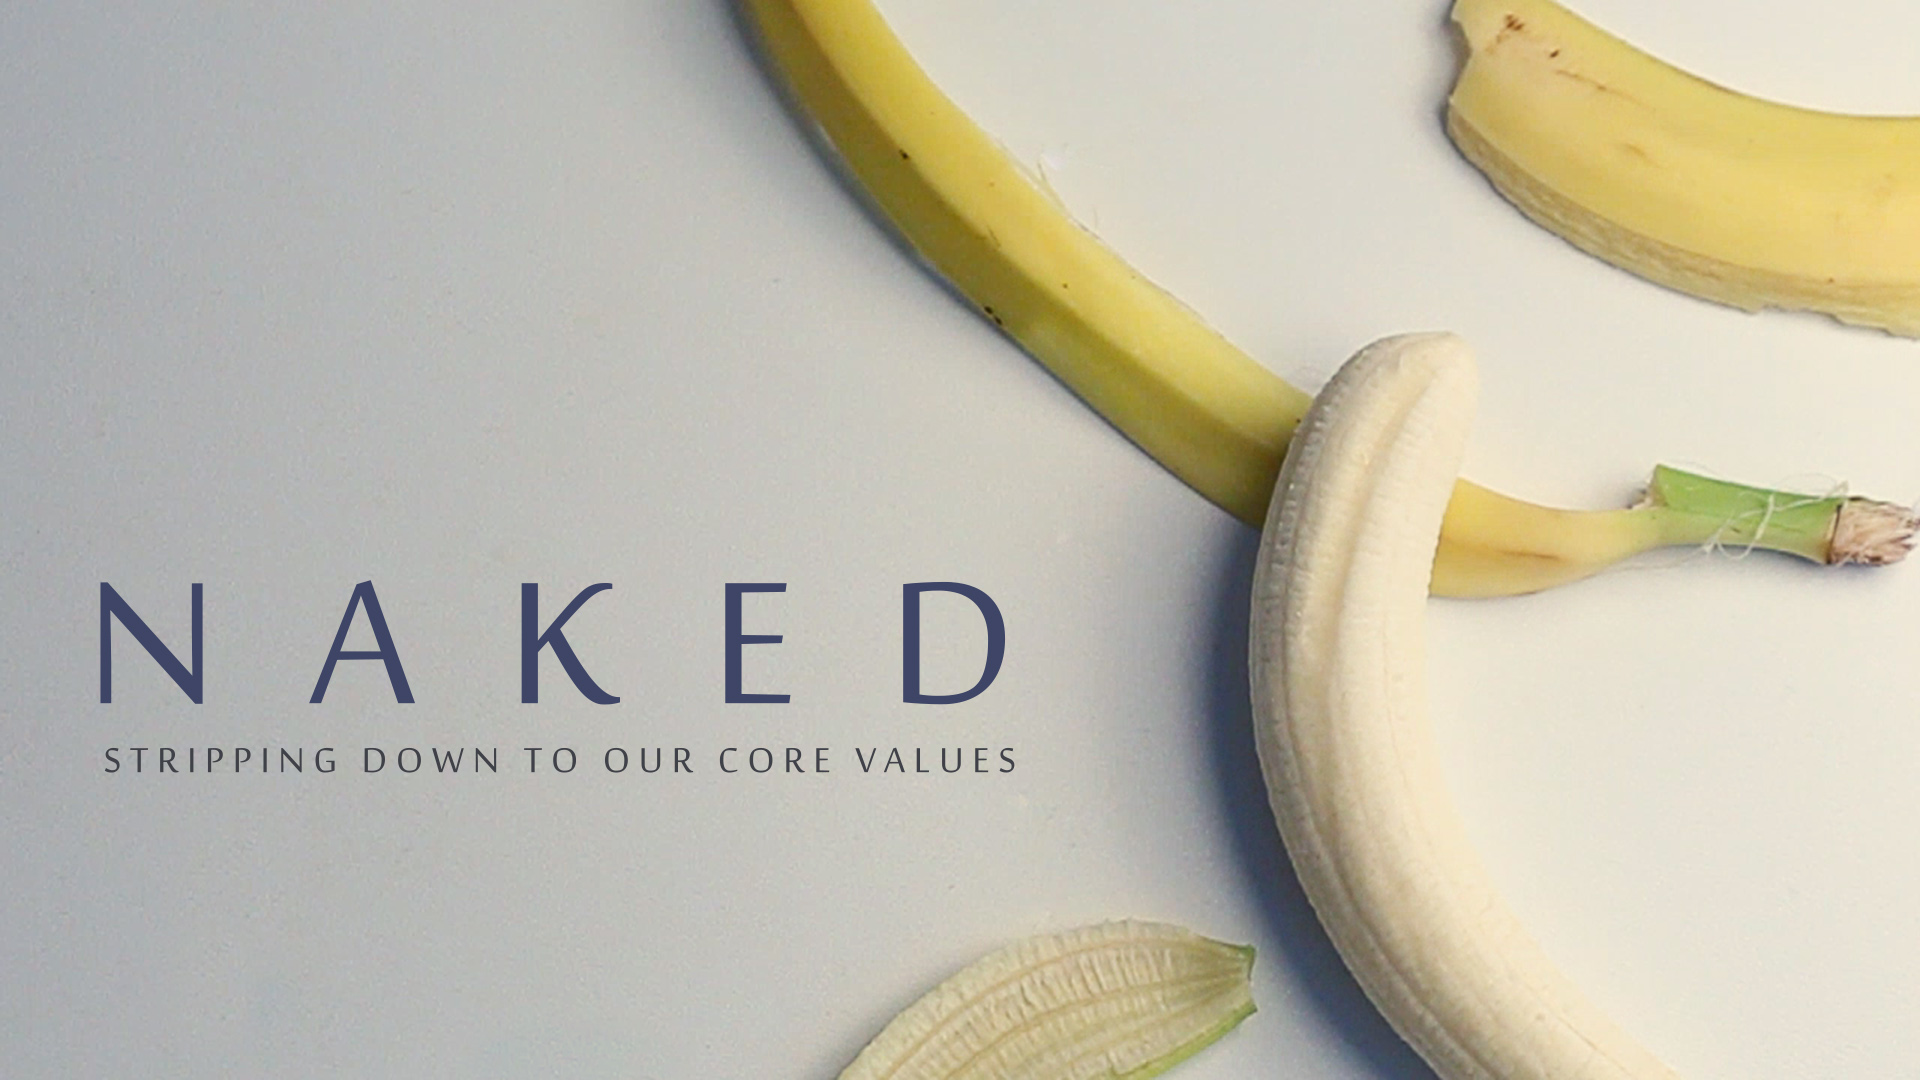 Naked: Stripping Down To Our Core Values